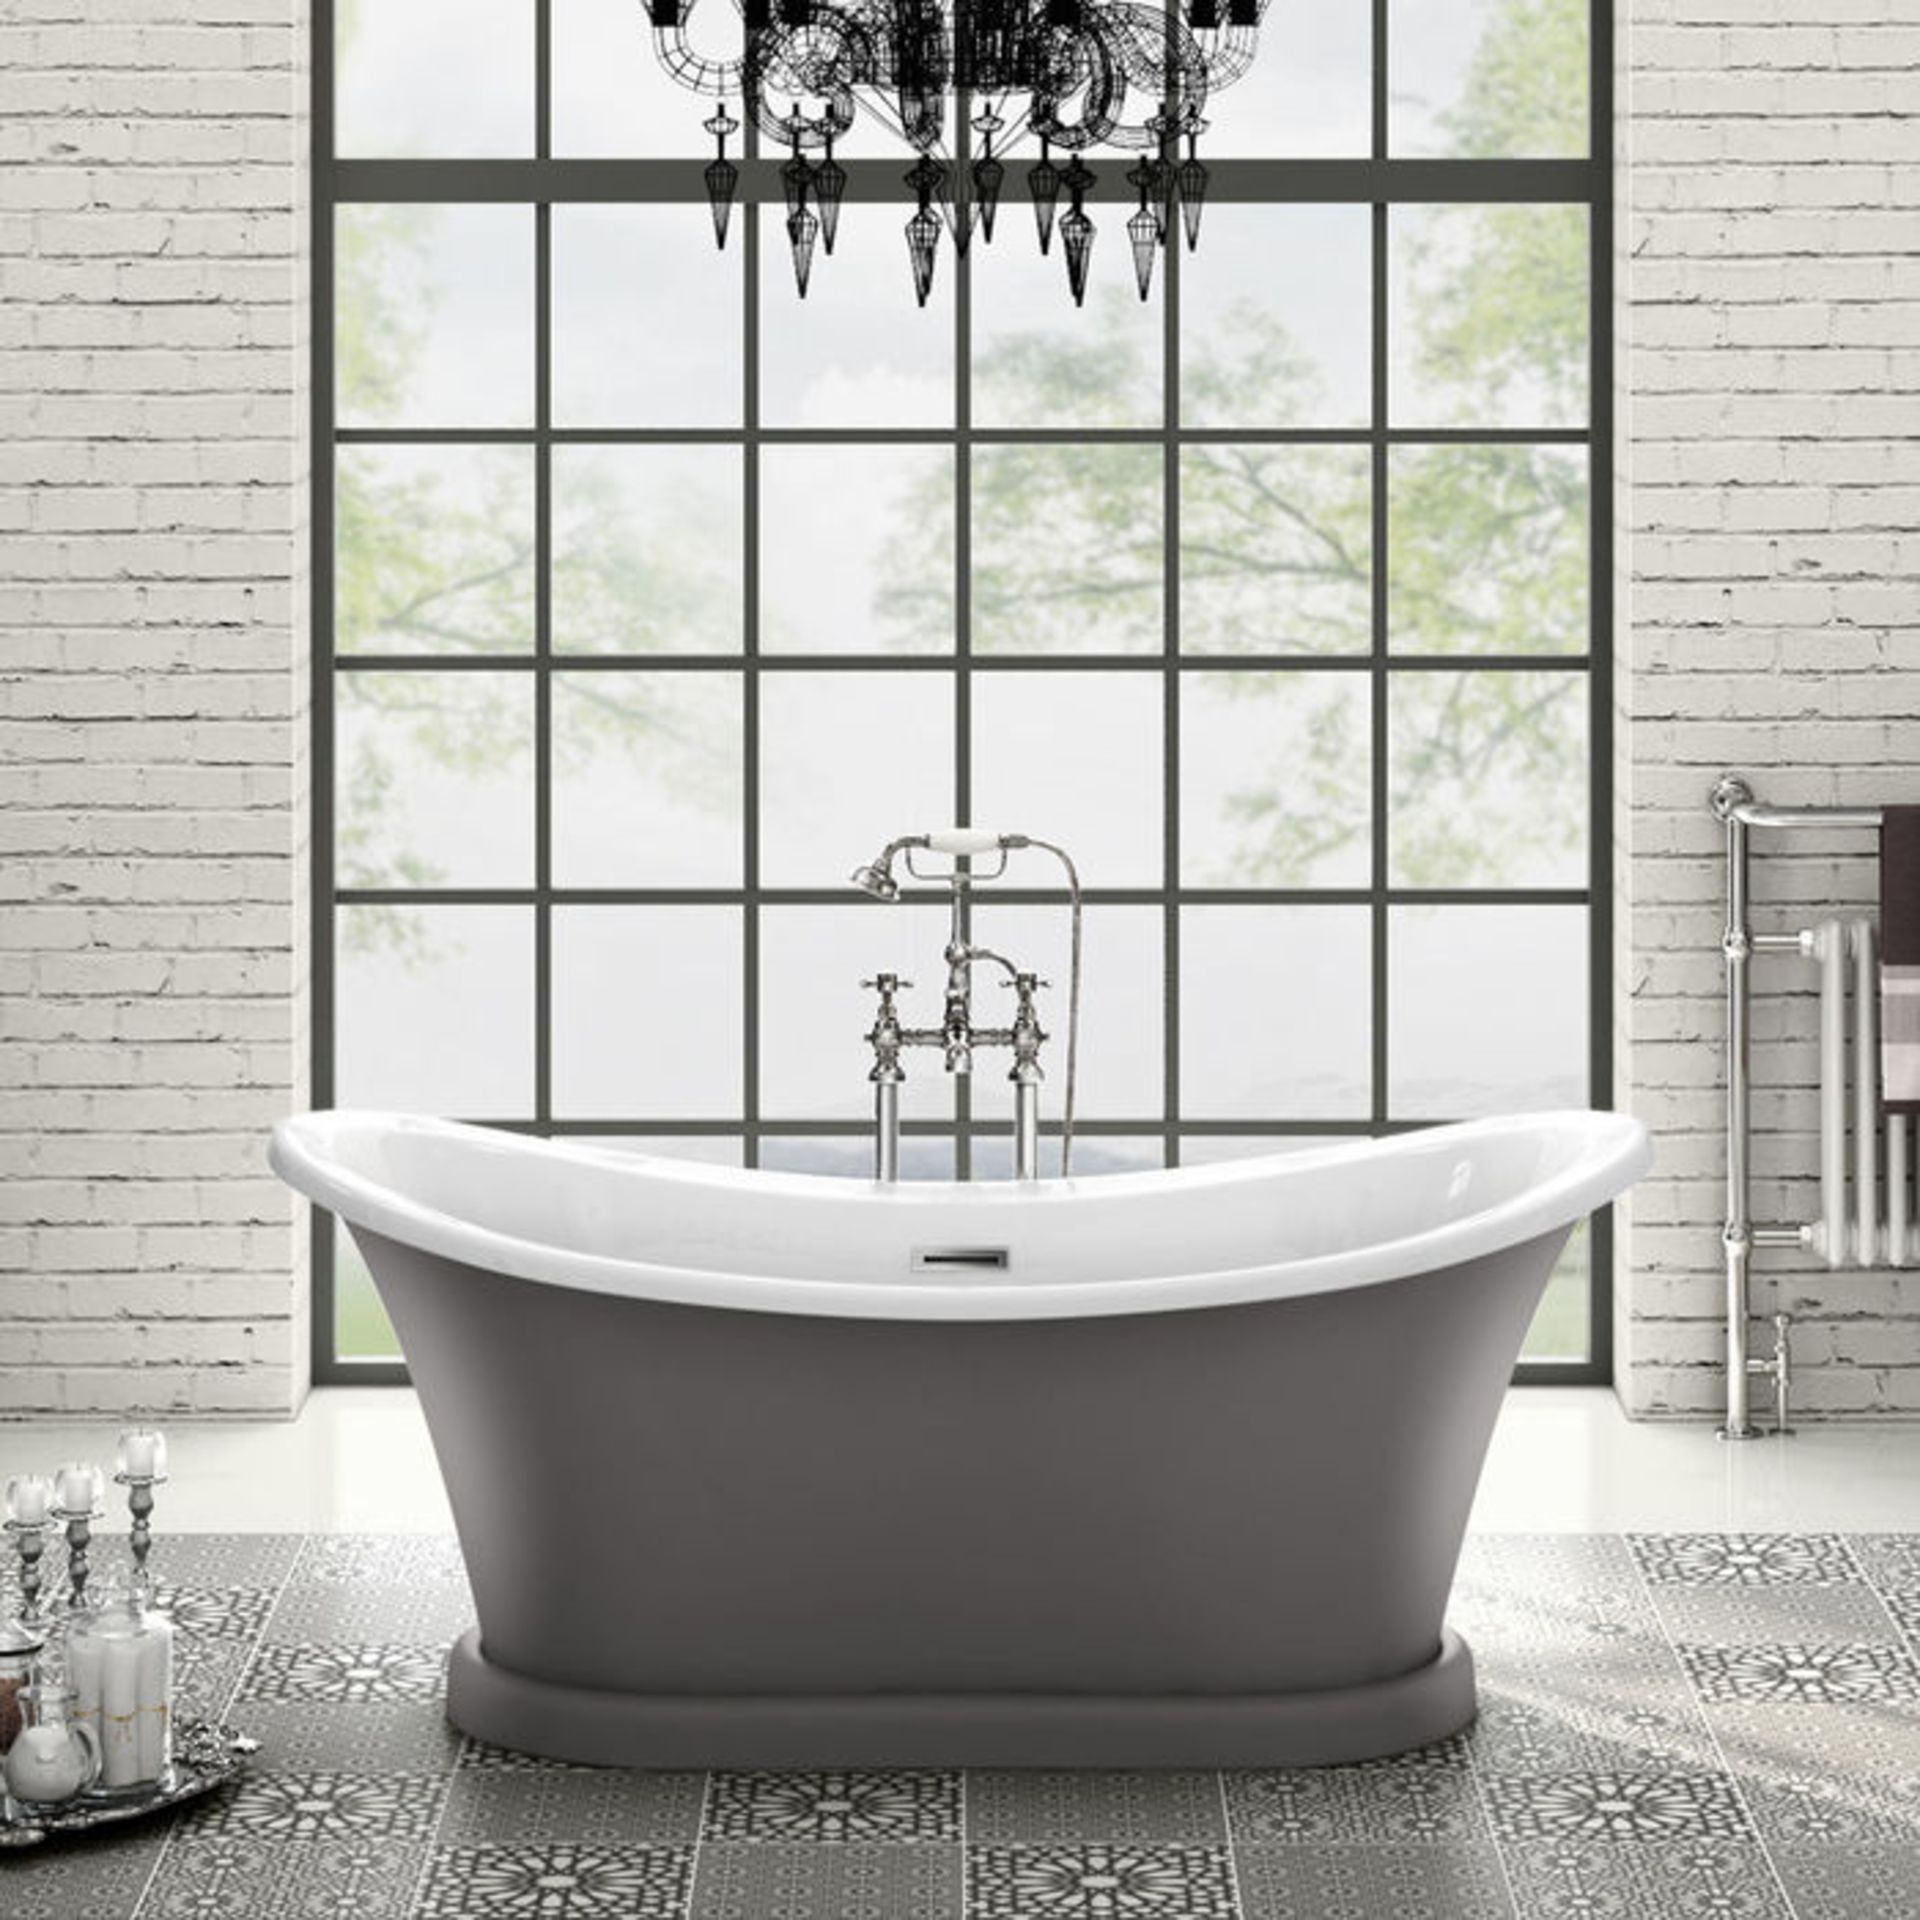 (XS3) 1700mm York Grey Bathtub. Victorian inspired bath Stunning Matte Earl Grey finish Double ended - Image 2 of 6